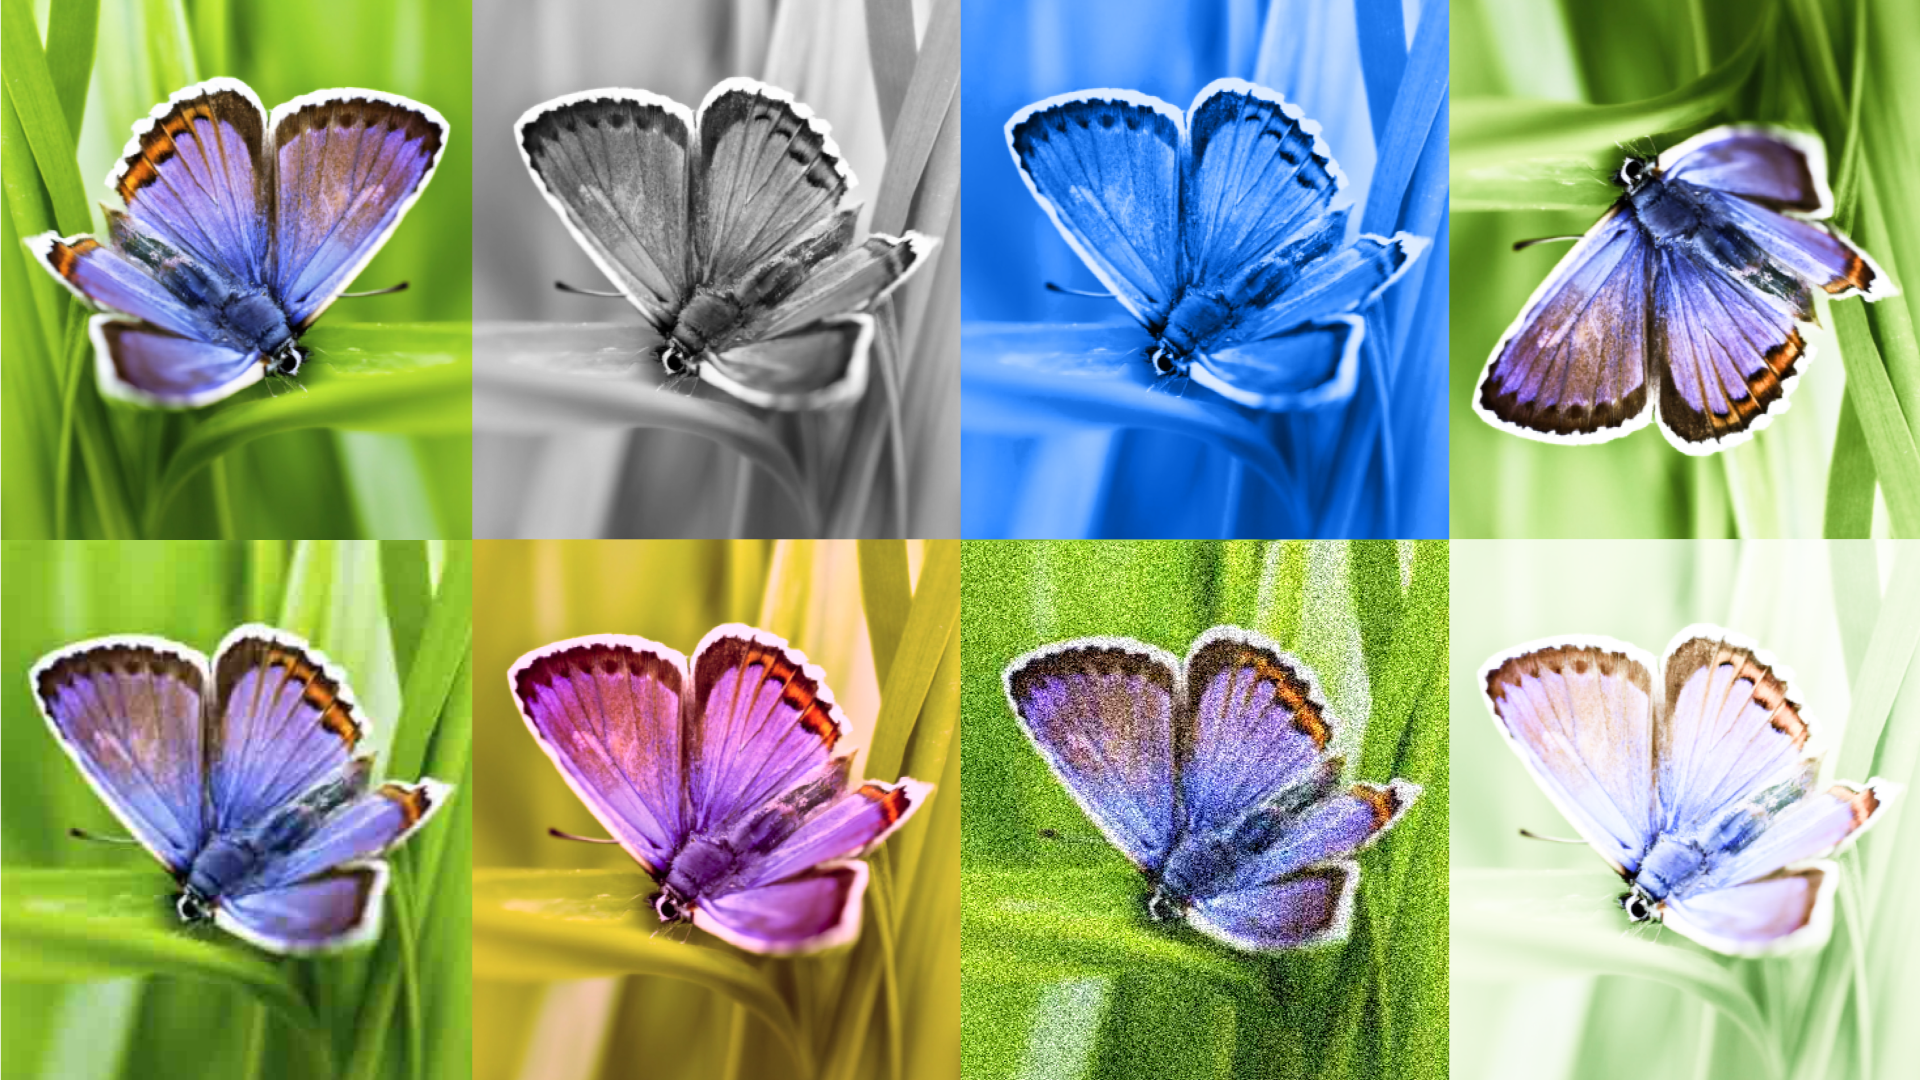 DeepMind Introduces SynthID to Watermark AI-Generated Images